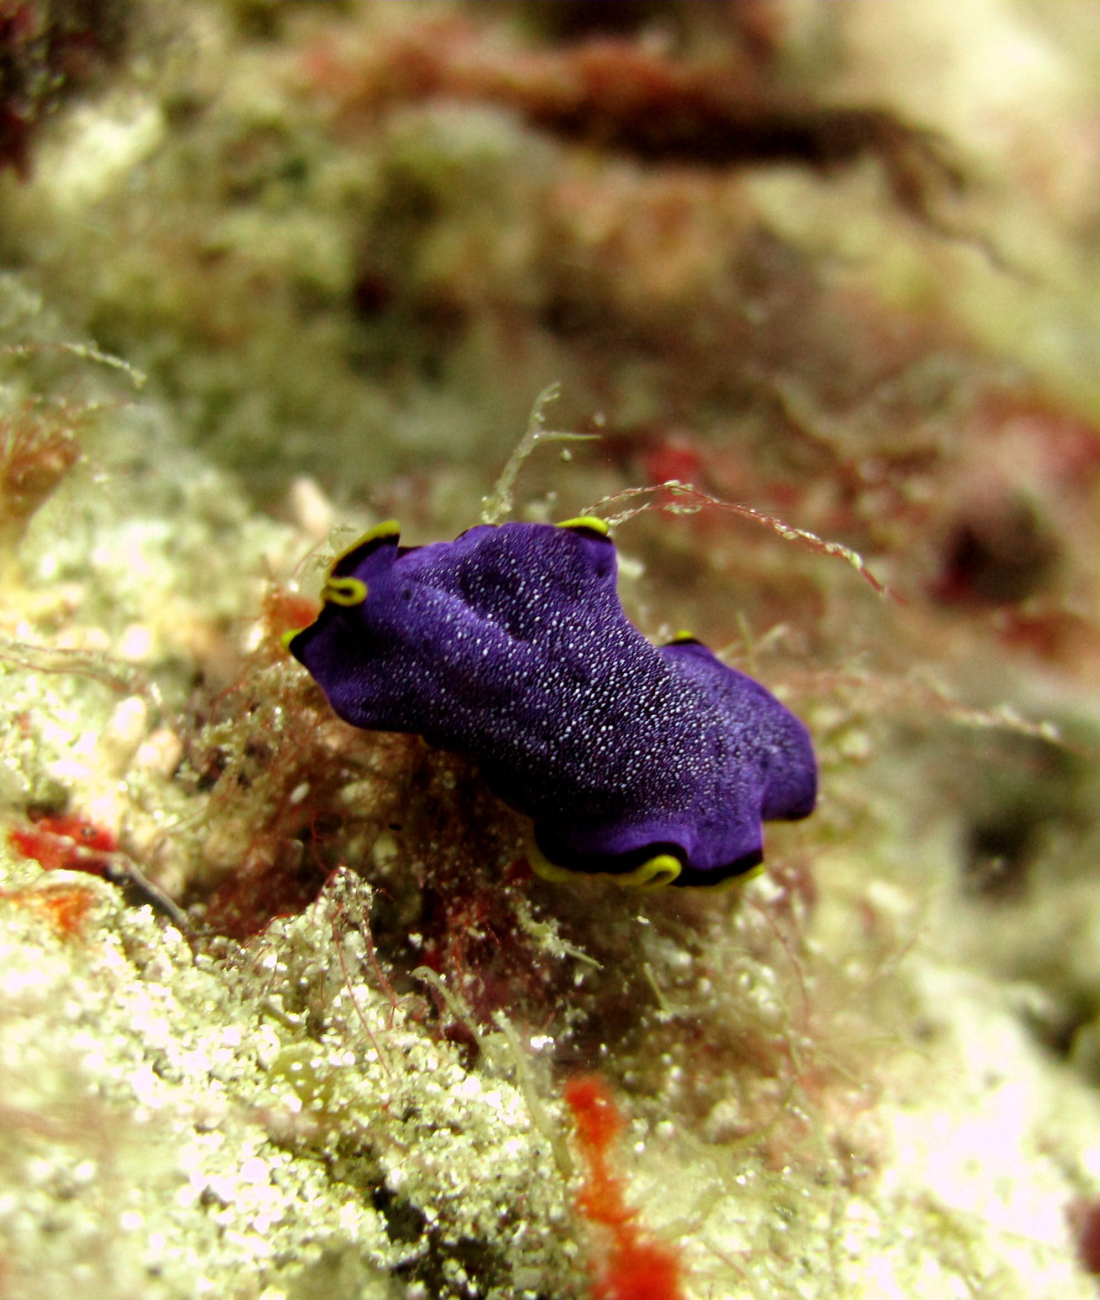 A purple flatworm with yellow and black fringing bands